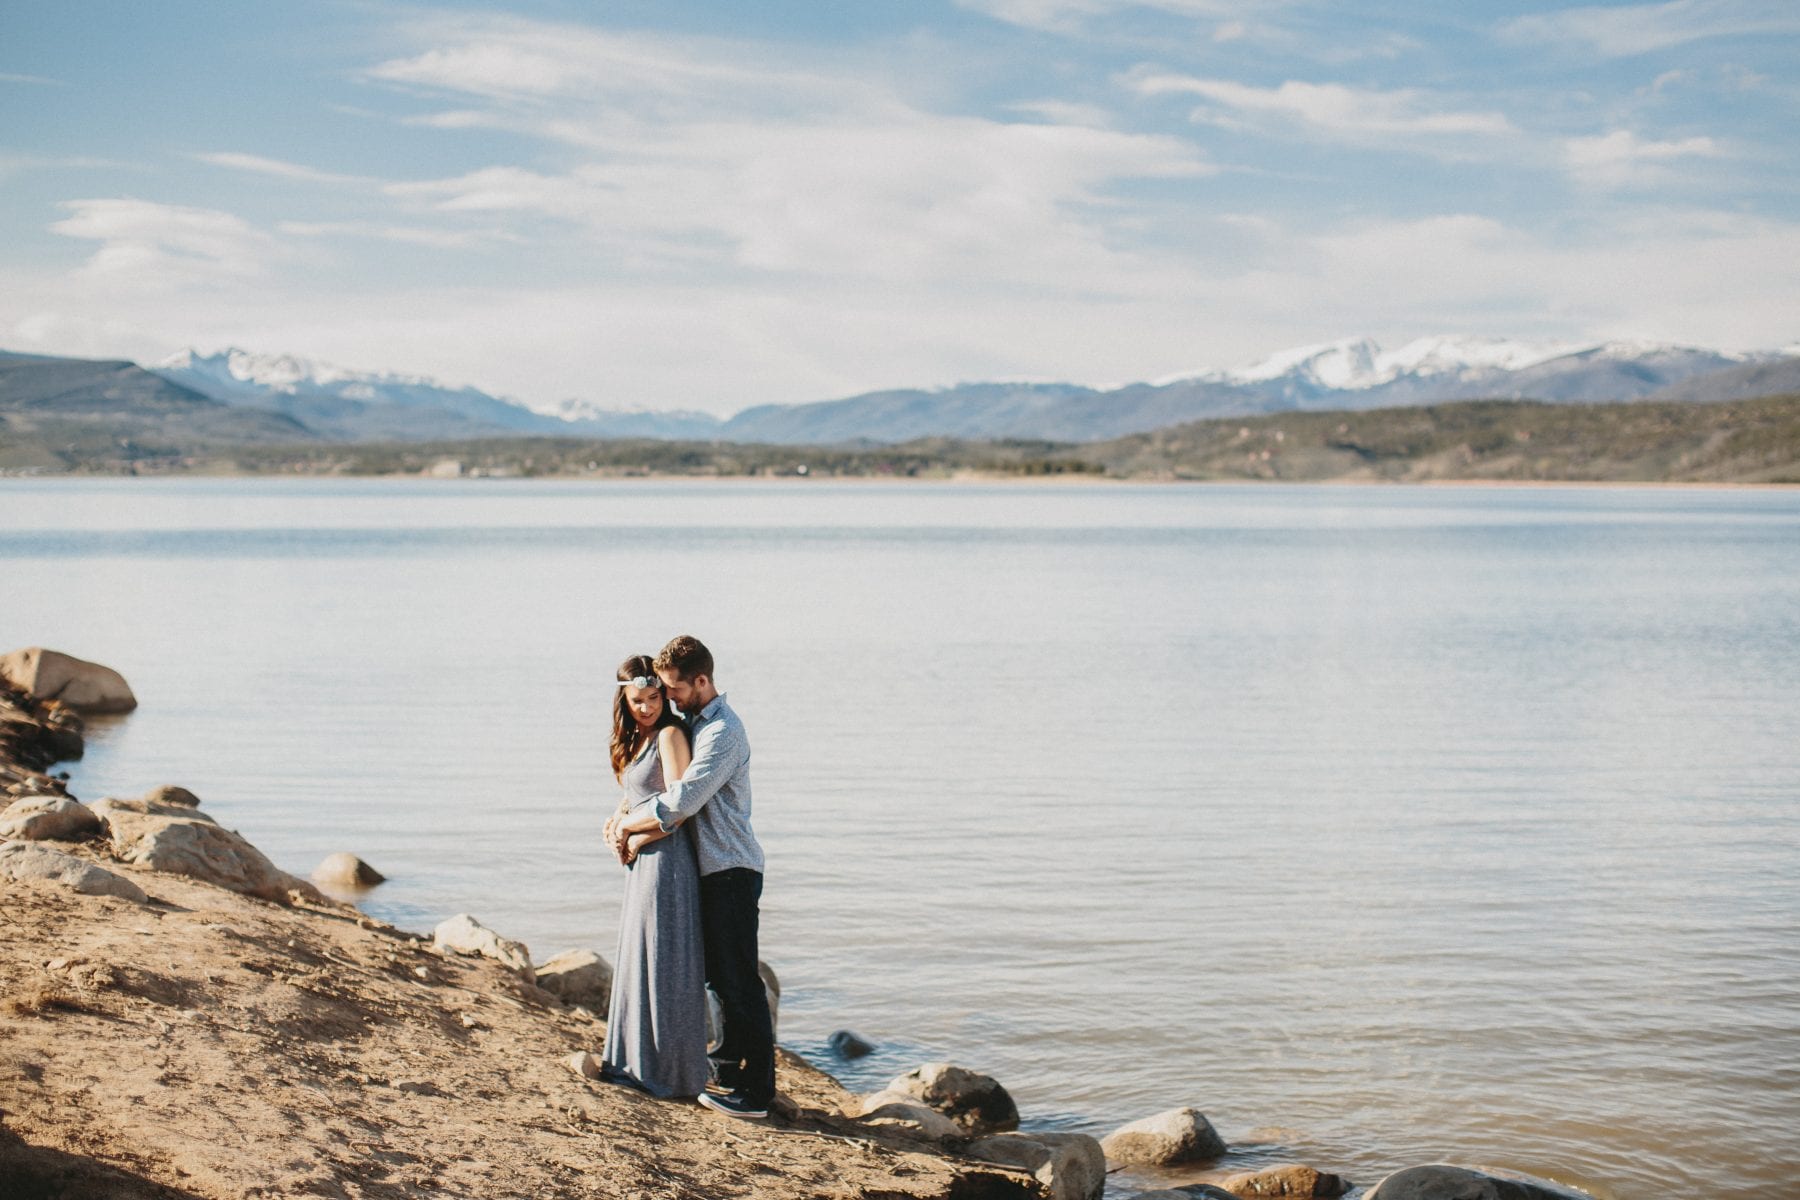 Couple embrace on lake shore with moutains in background - Grand Lake Colorado Family Portraits - Destination Photographer